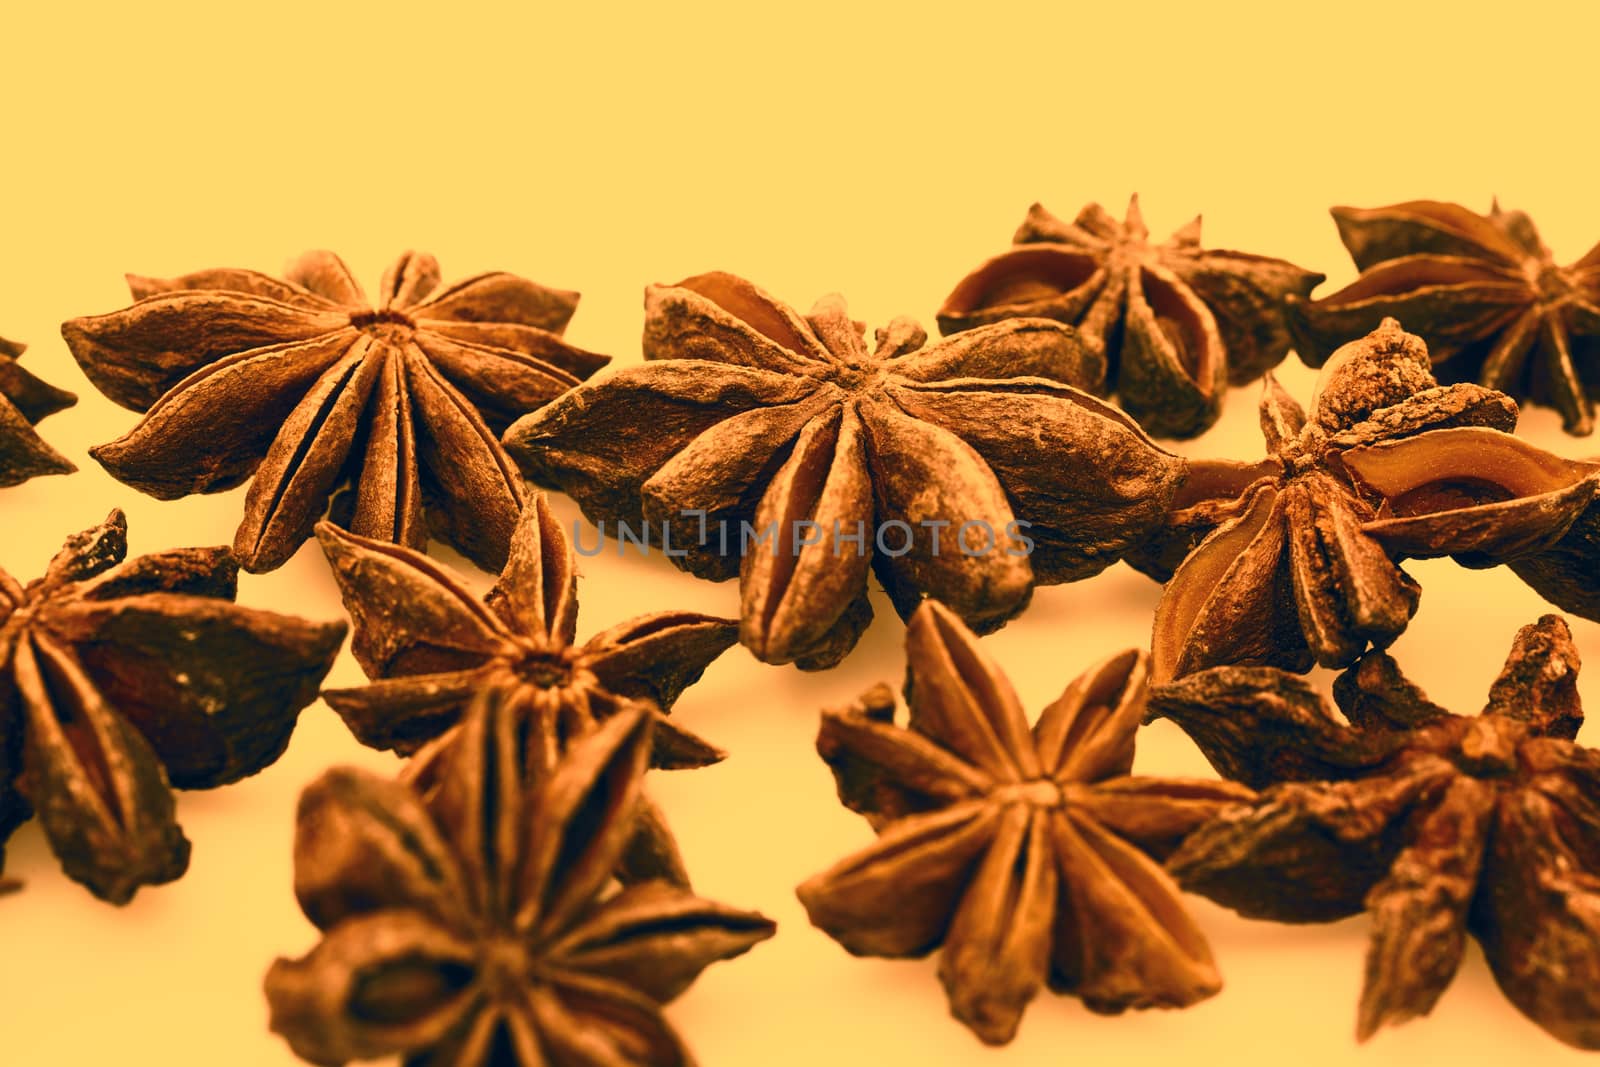 Anise stars by Portokalis